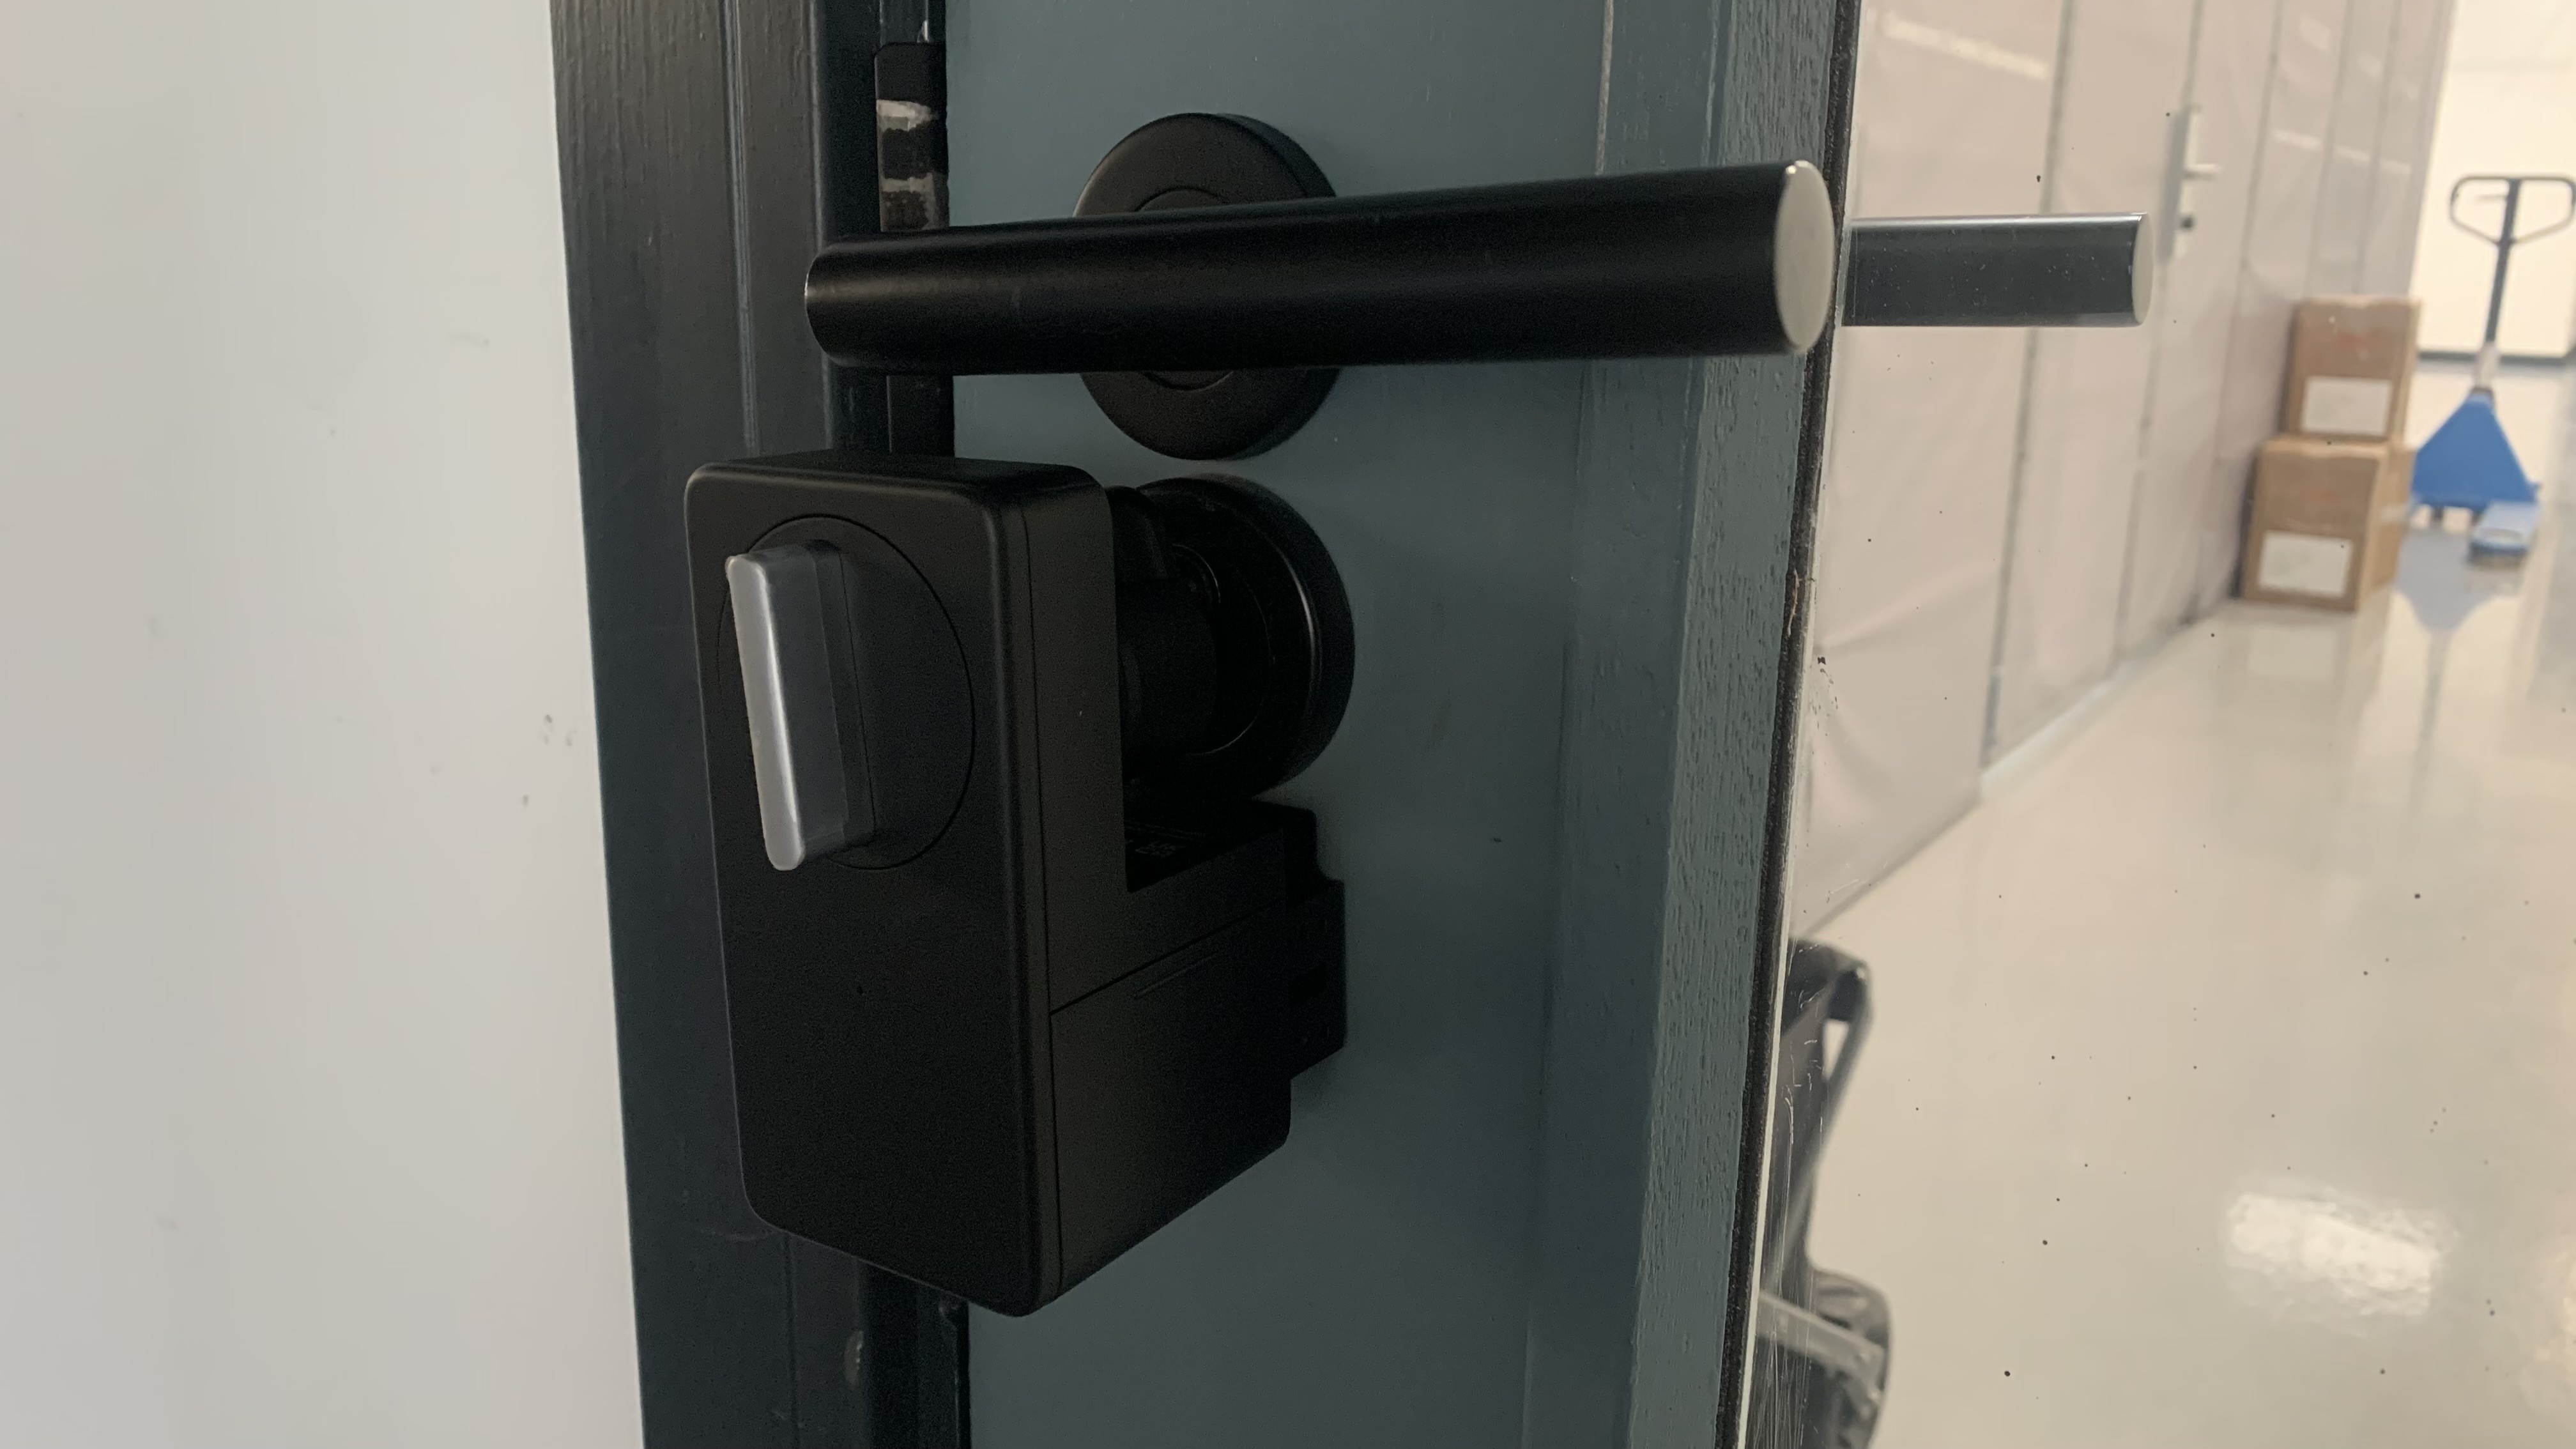 SwitchBot Lock: A potential smart lock solution for renters and